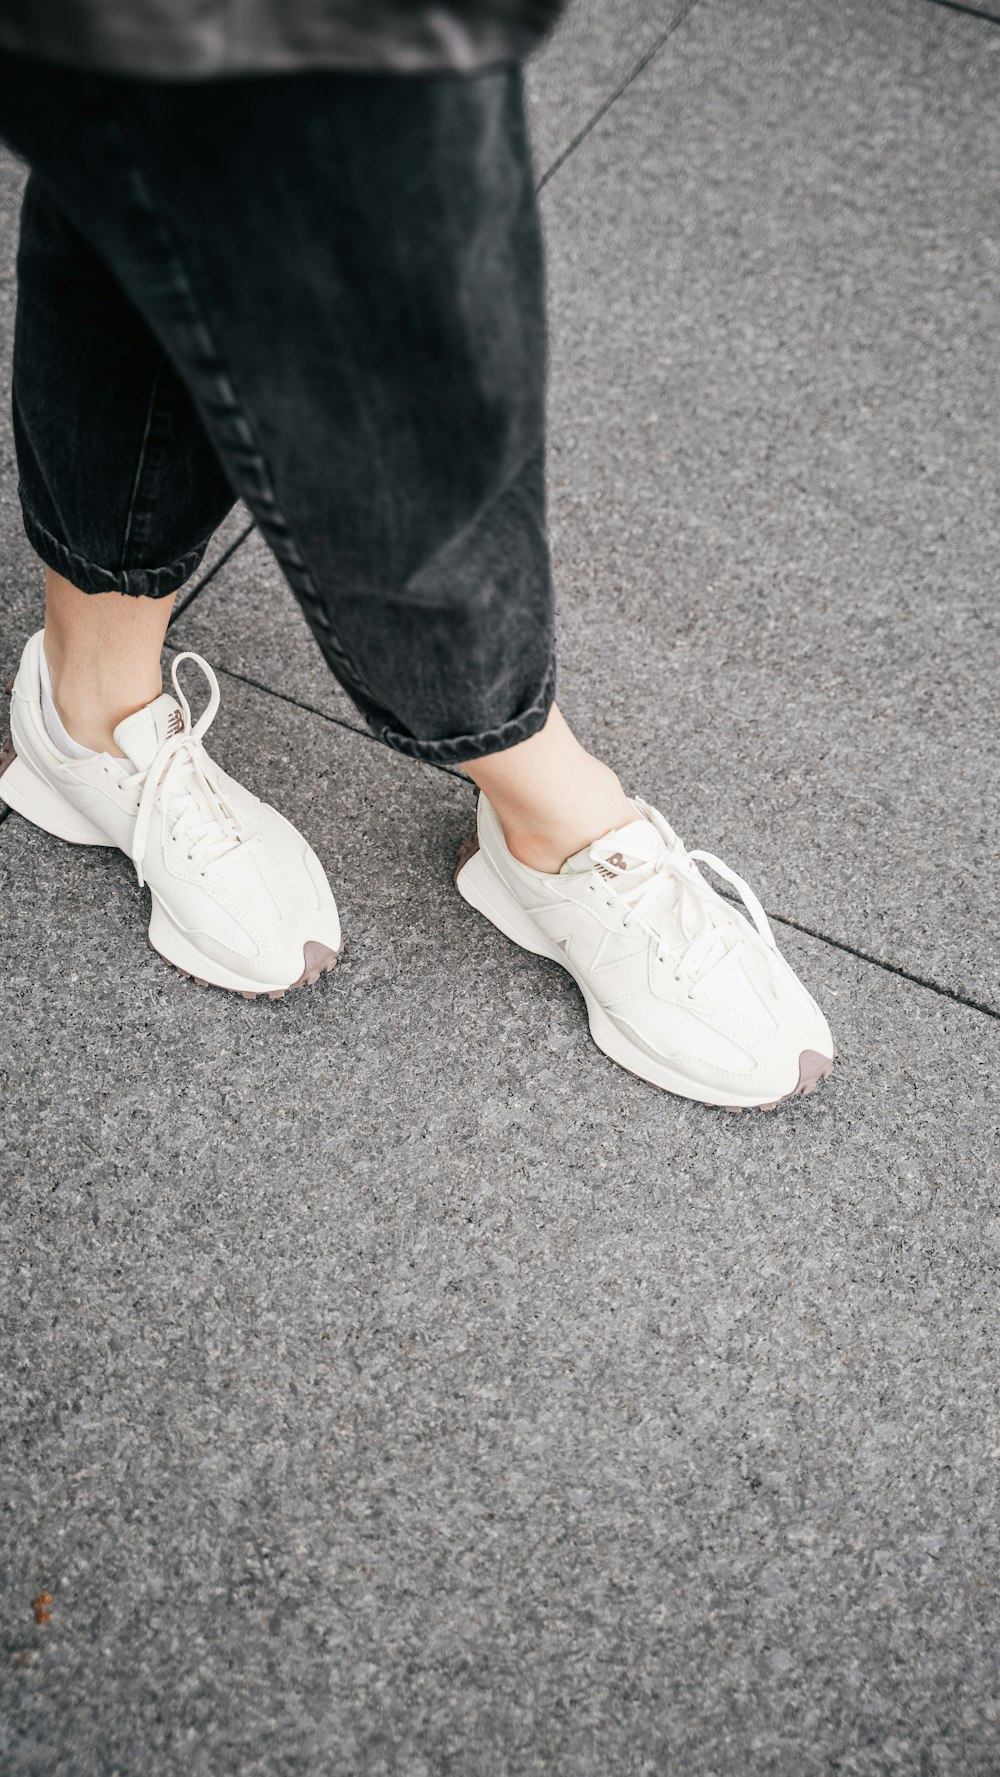 a person standing on a sidewalk wearing white sneakers